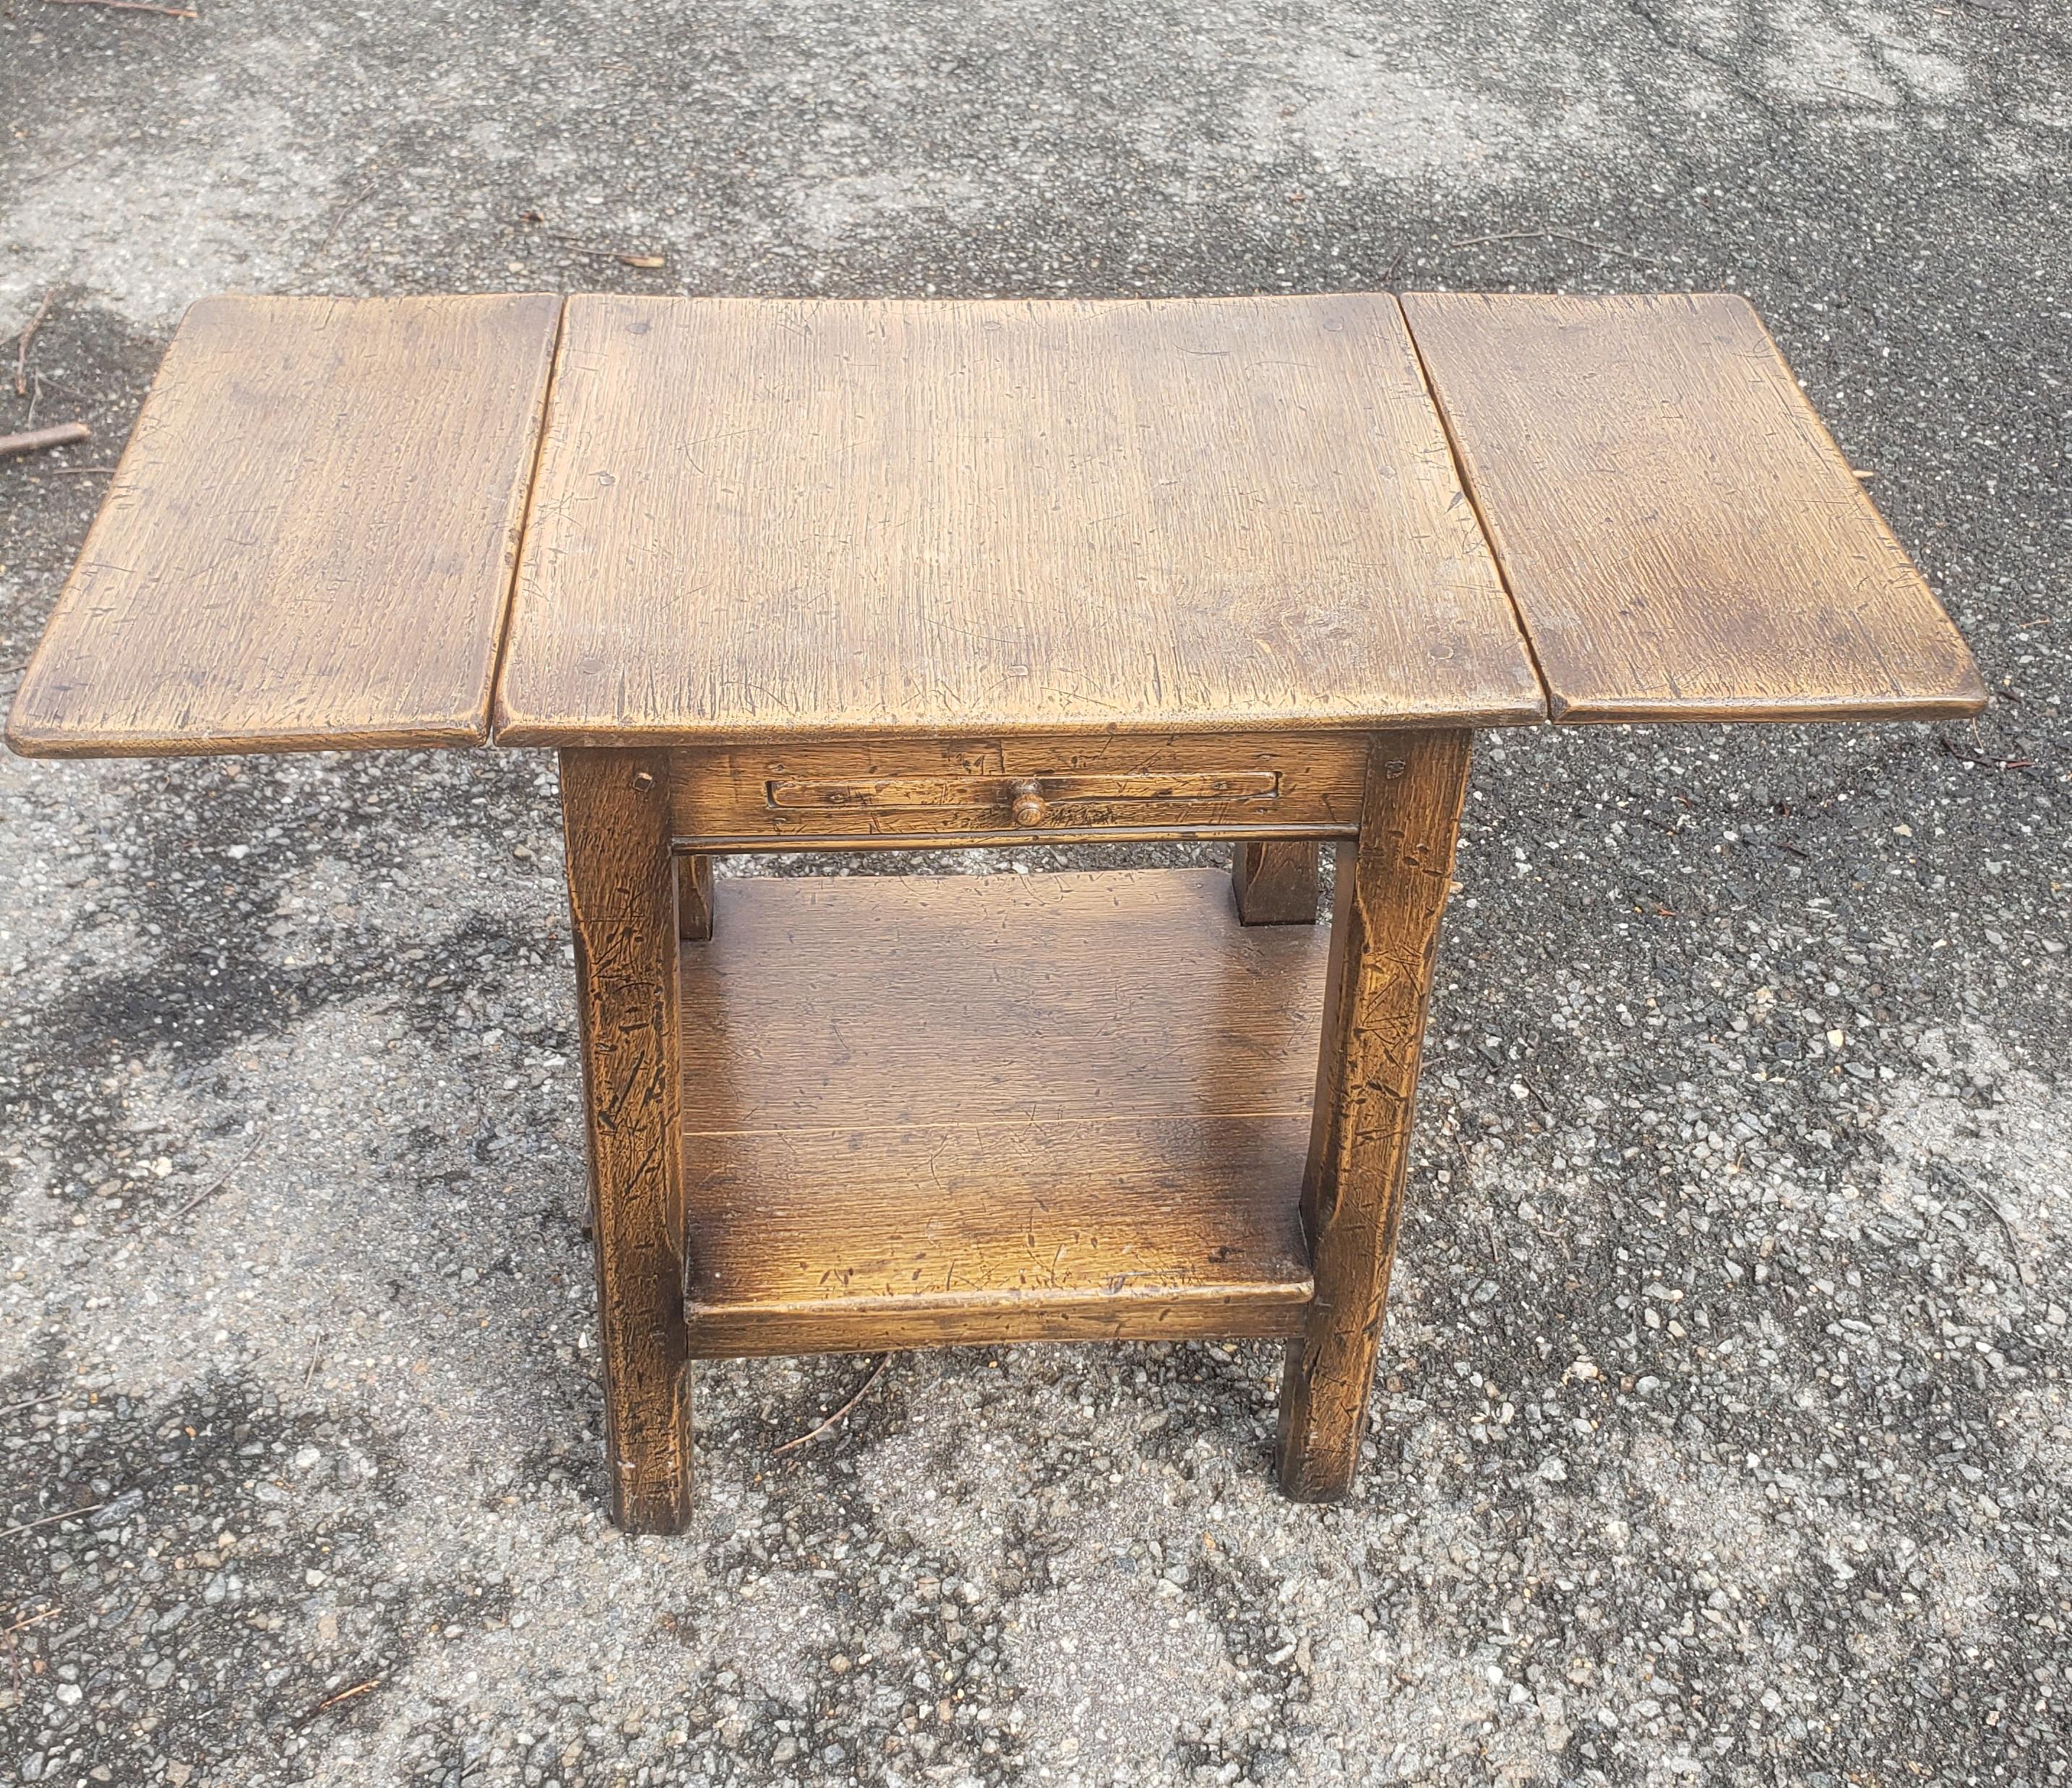 19th Century Early American Oak Drop-Leaf Side Table with Pull-Out Tray, circa 1890s